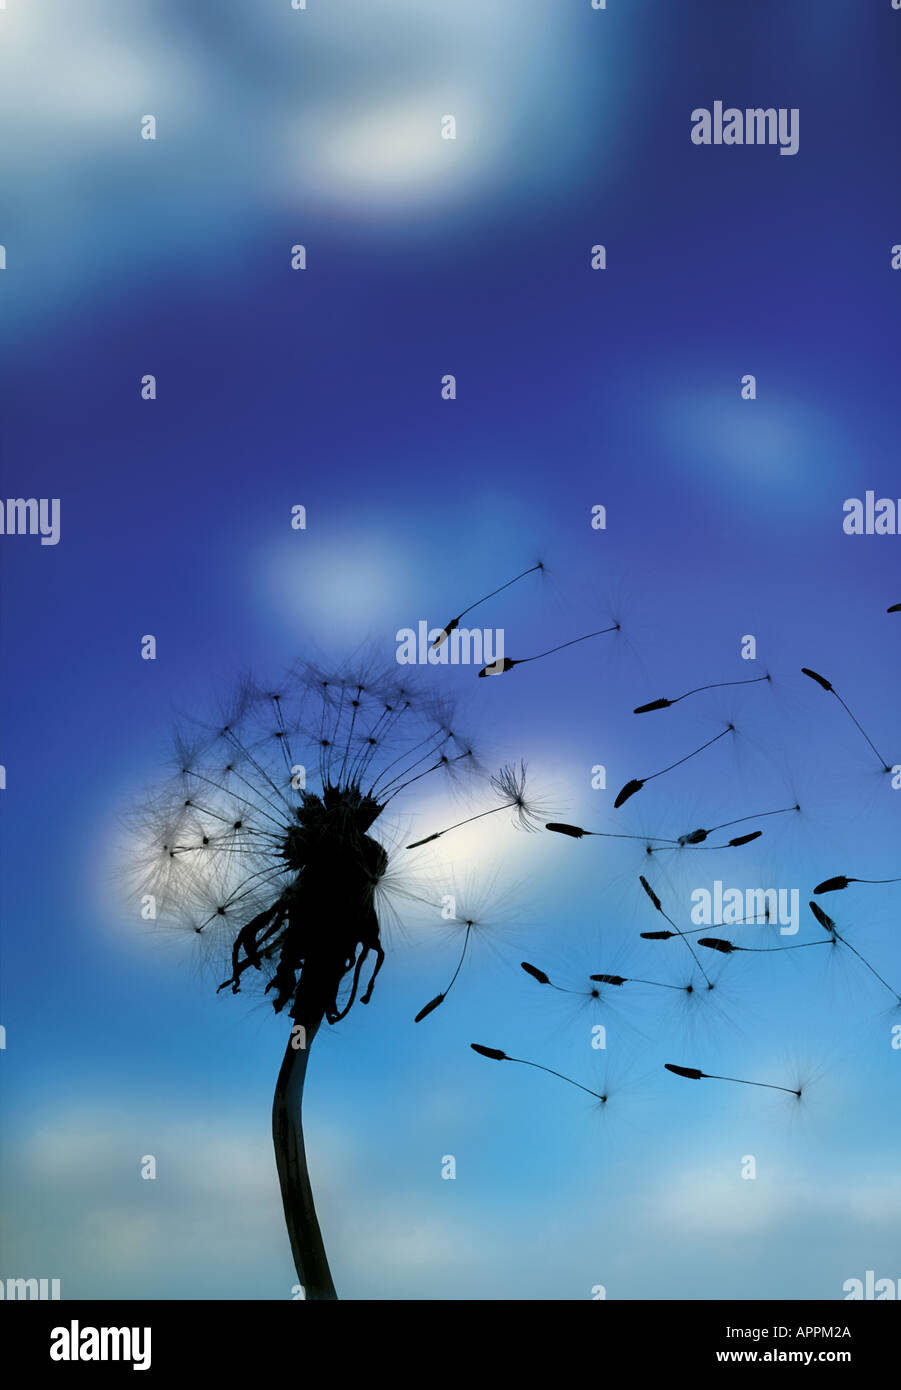 Dandelion flower with seeds being bown away by the wind Concept metaphor for business growth Stock Photo